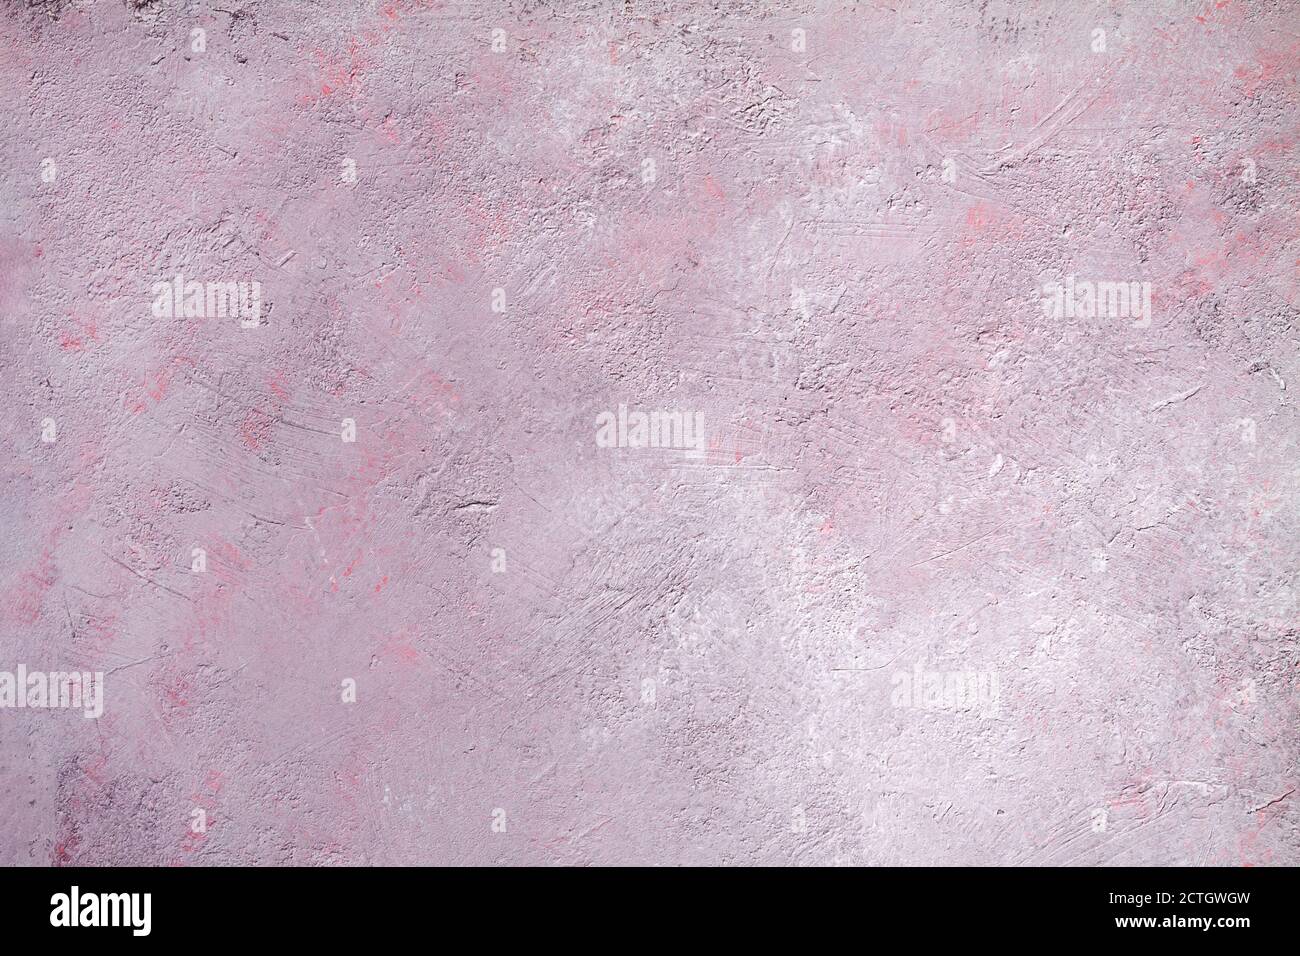 Concrete pink gray background with scuffs and black splashes. Textured wall texture in the grunge style. Stock Photo